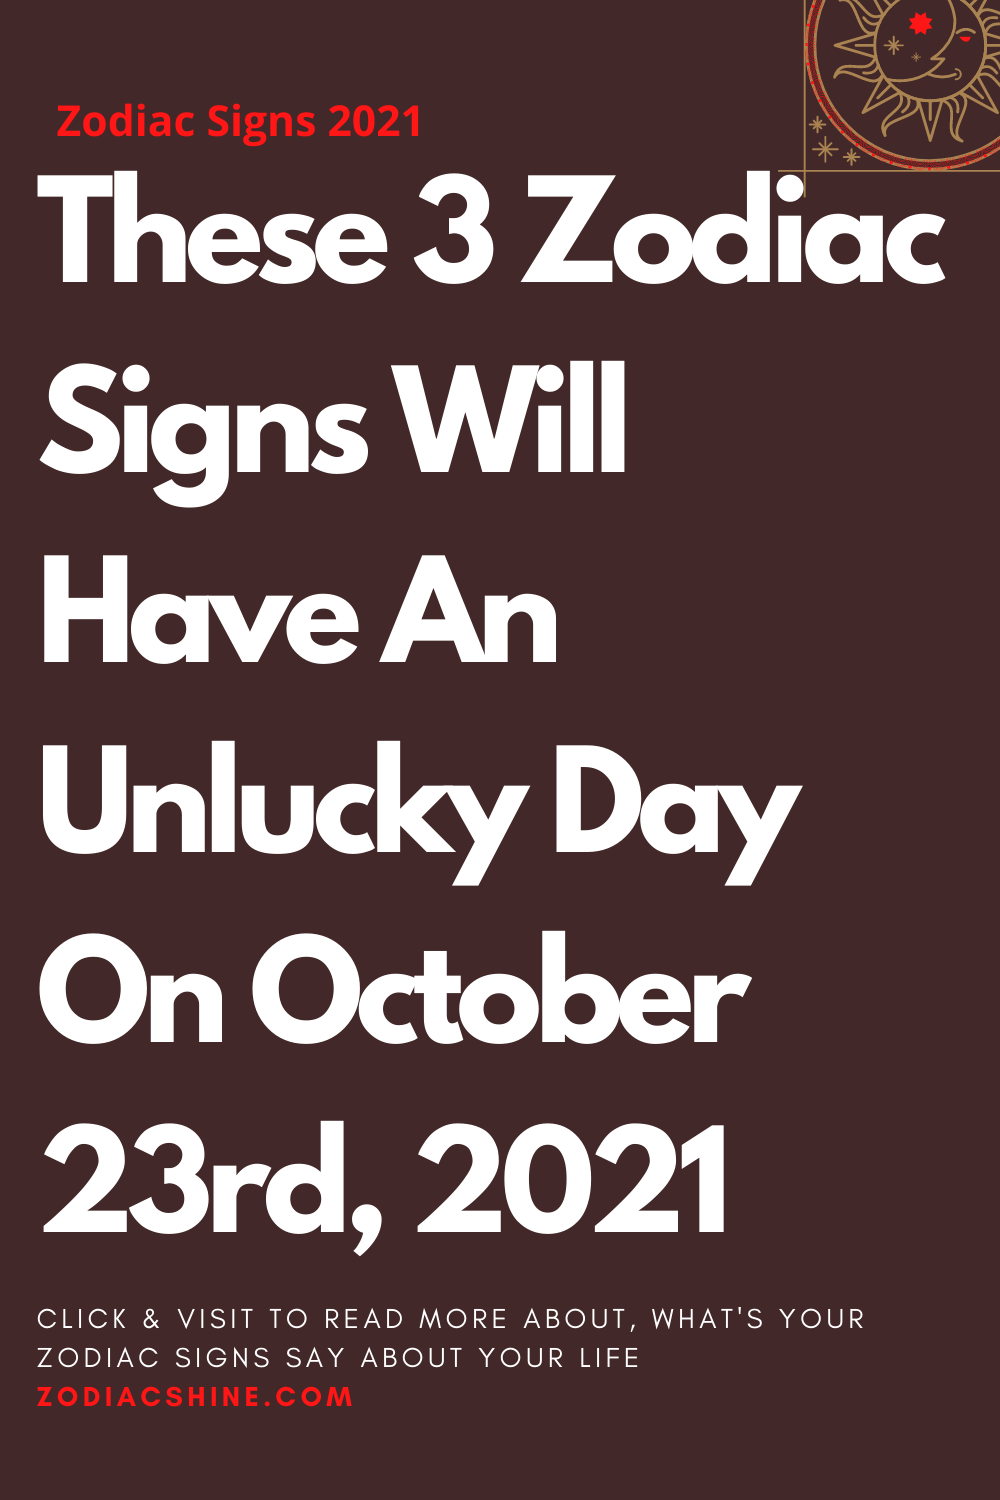 These 3 Zodiac Signs Will Have An Unlucky Day On October 23rd 2021